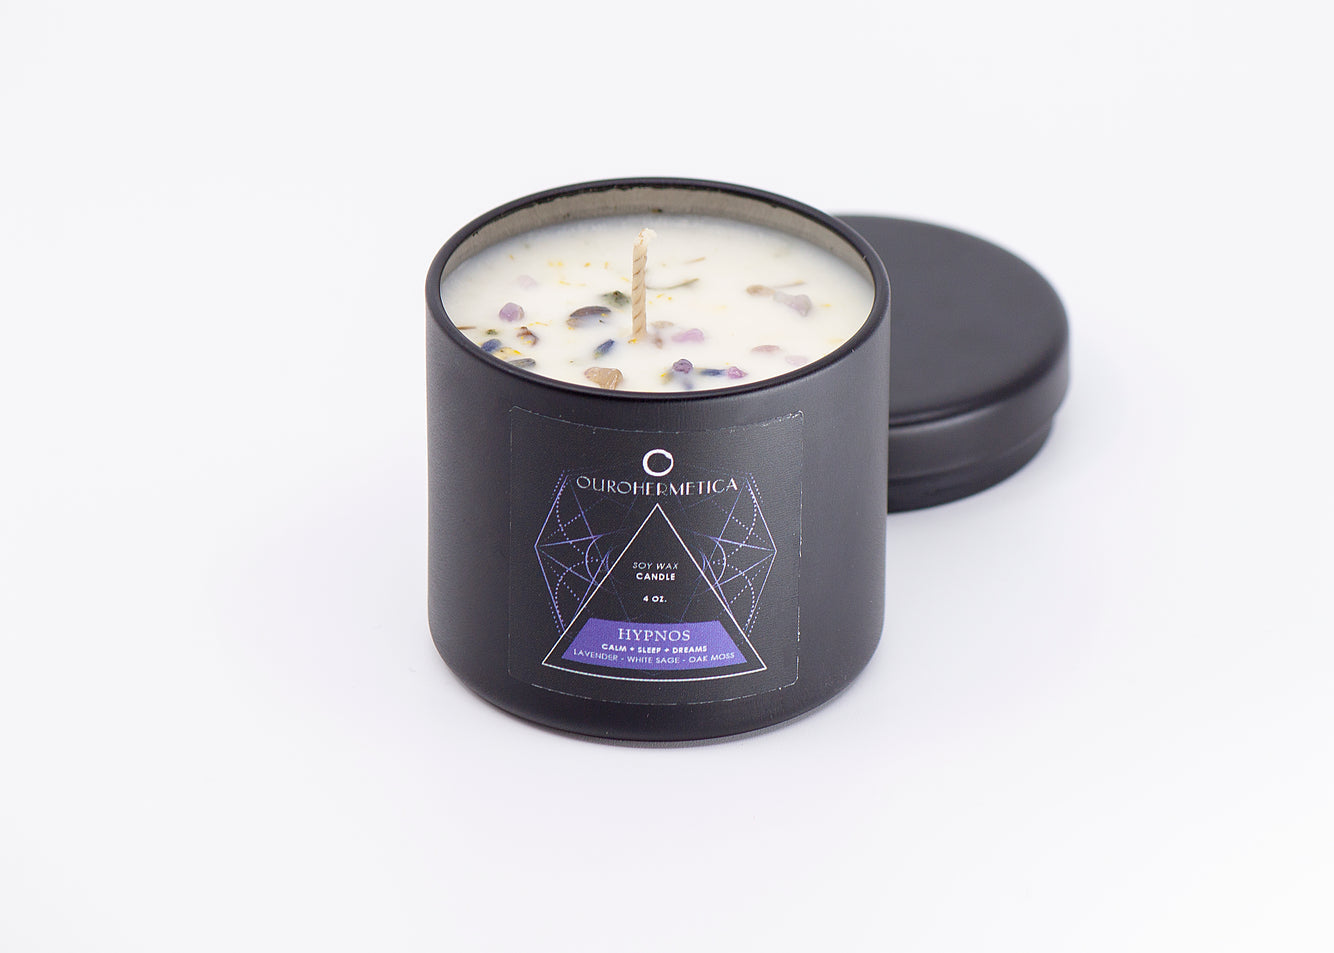 Hypnos Ritual Soy Candle with Botanicals & Amethyst